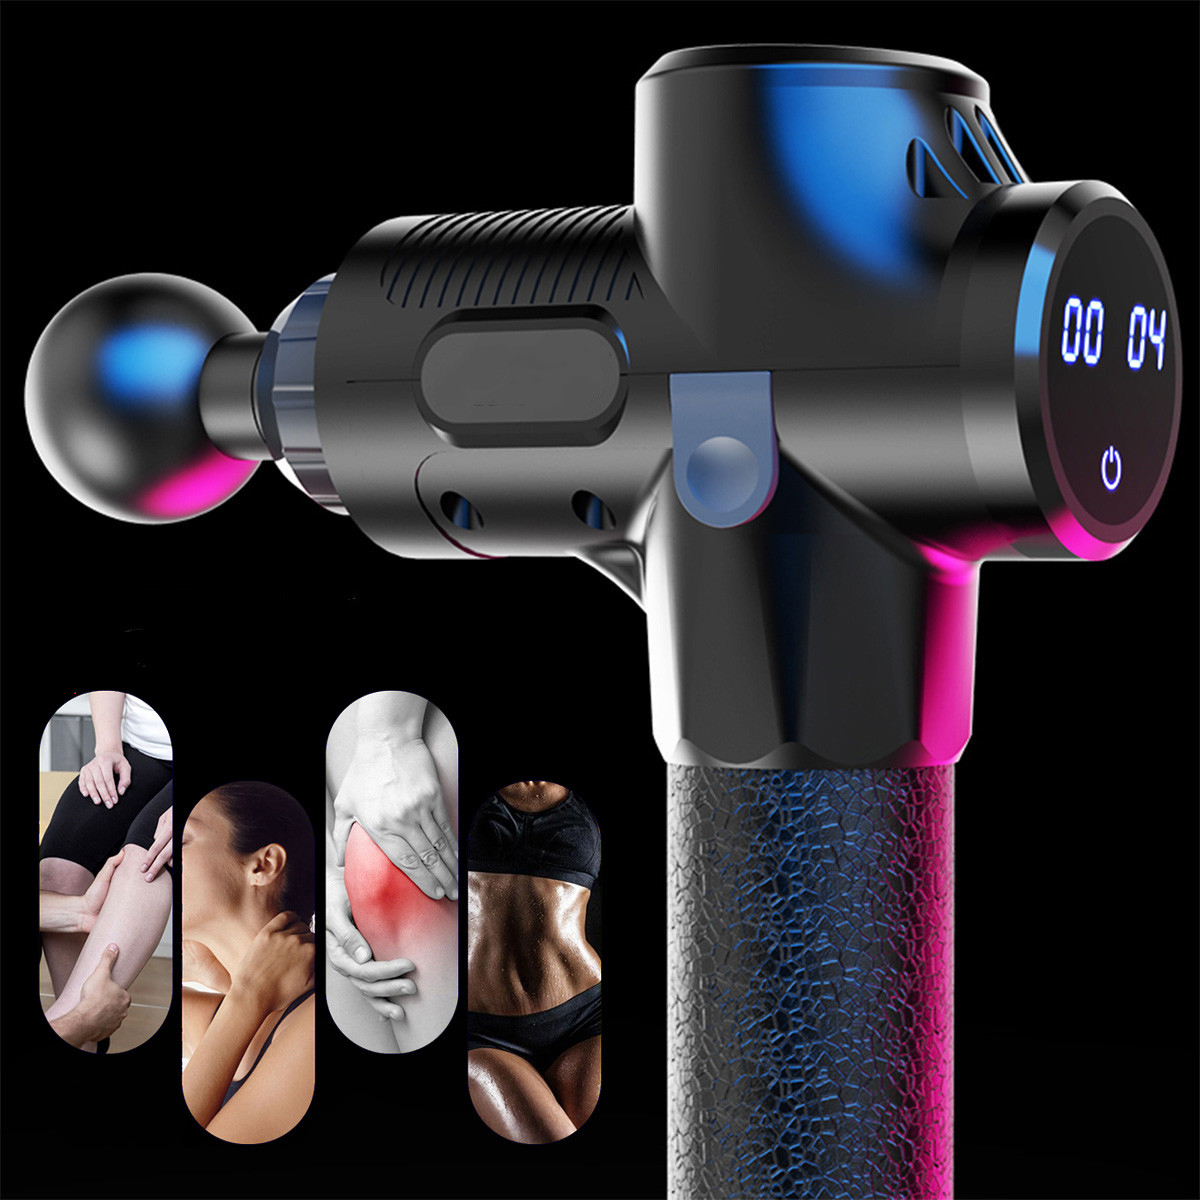 2500mAh Electric Massager Muscle Massage Therapy Vibration G un Deep Tissue Display Cordless Percussion Massager Percussion Massage Device 16